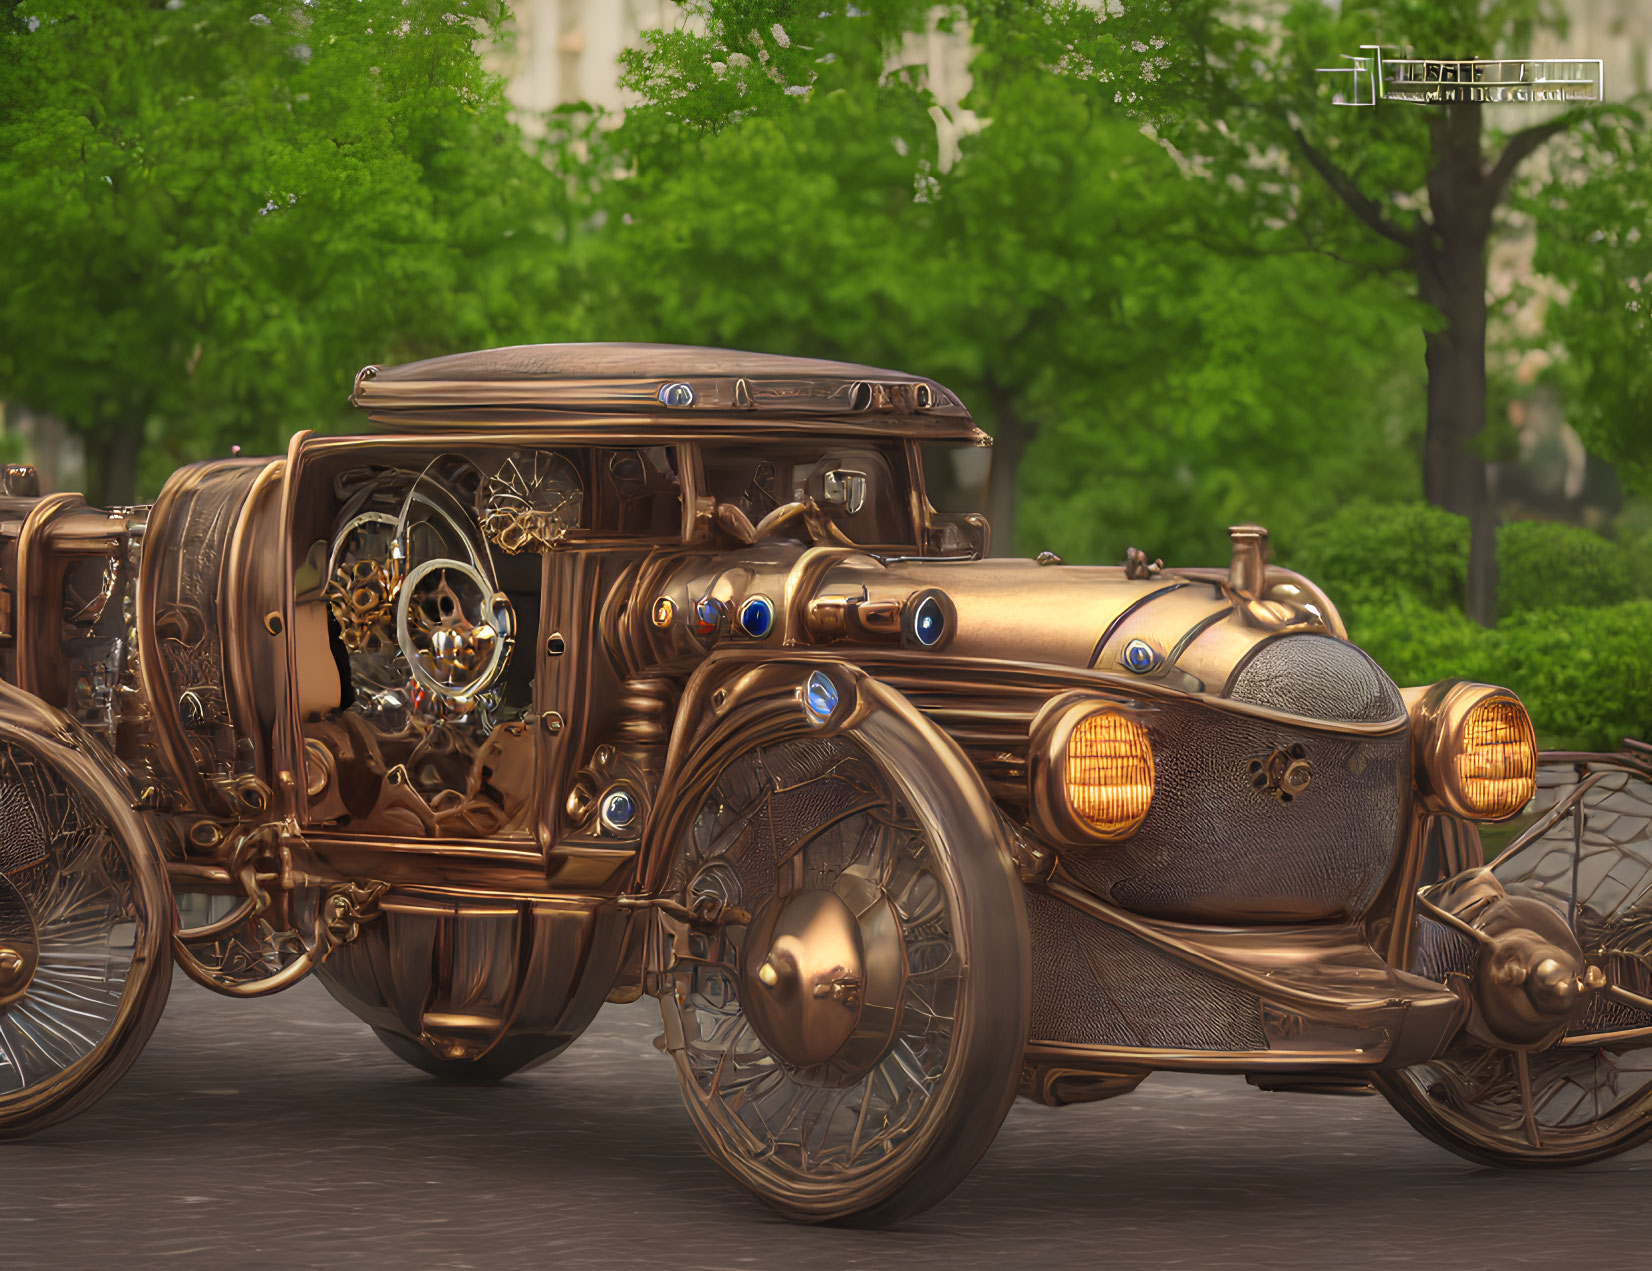 Intricate steampunk vehicle with metallic cogs in scenic setting